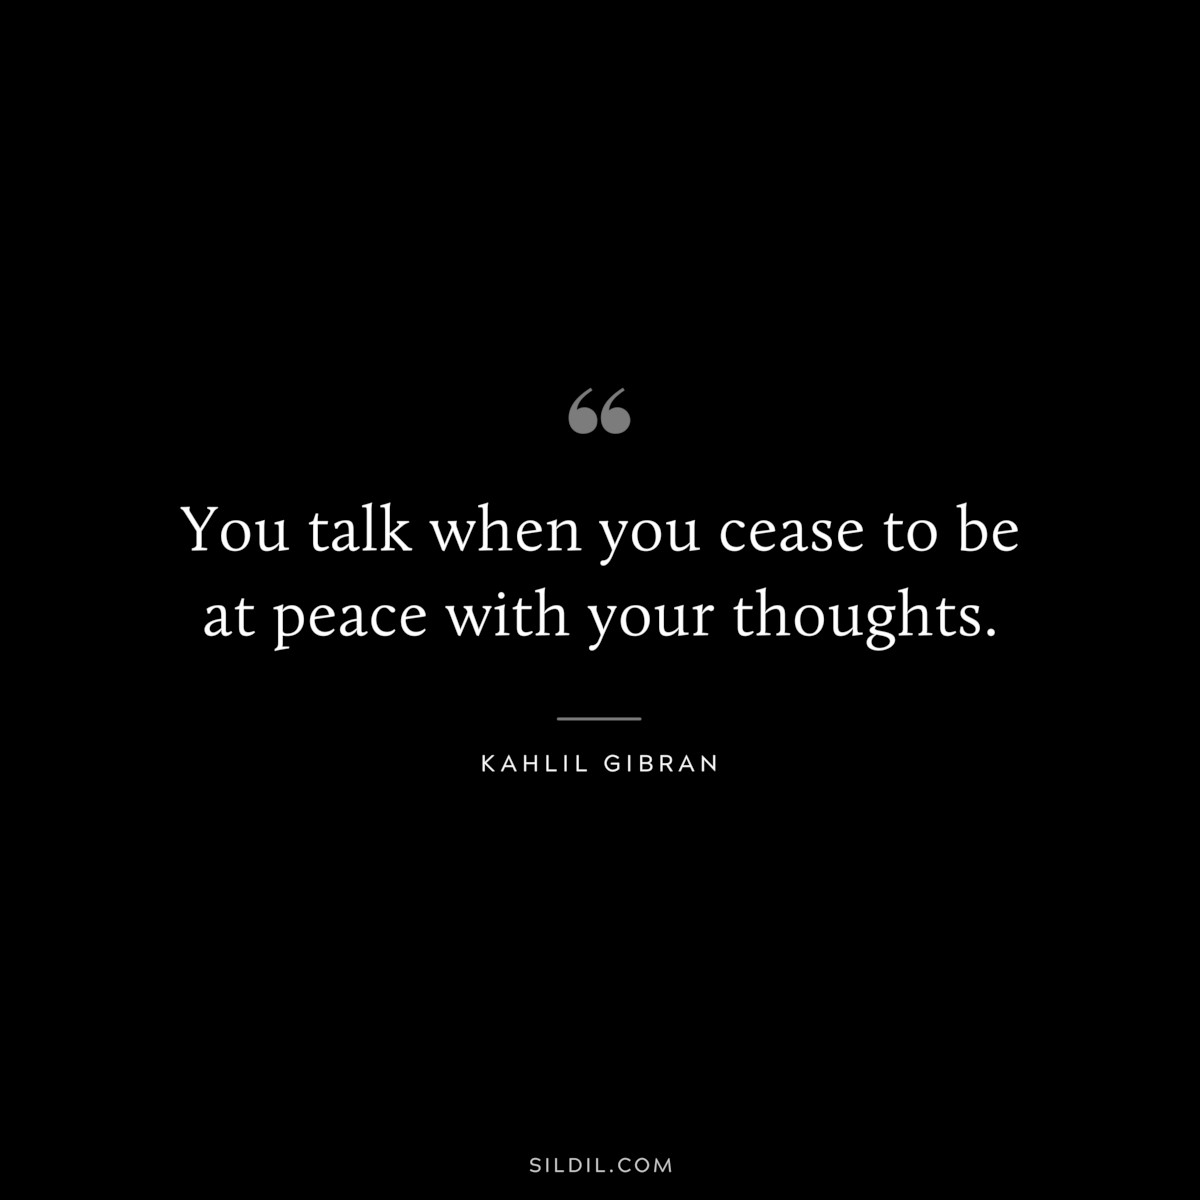 You talk when you cease to be at peace with your thoughts. ― Kahlil Gibran